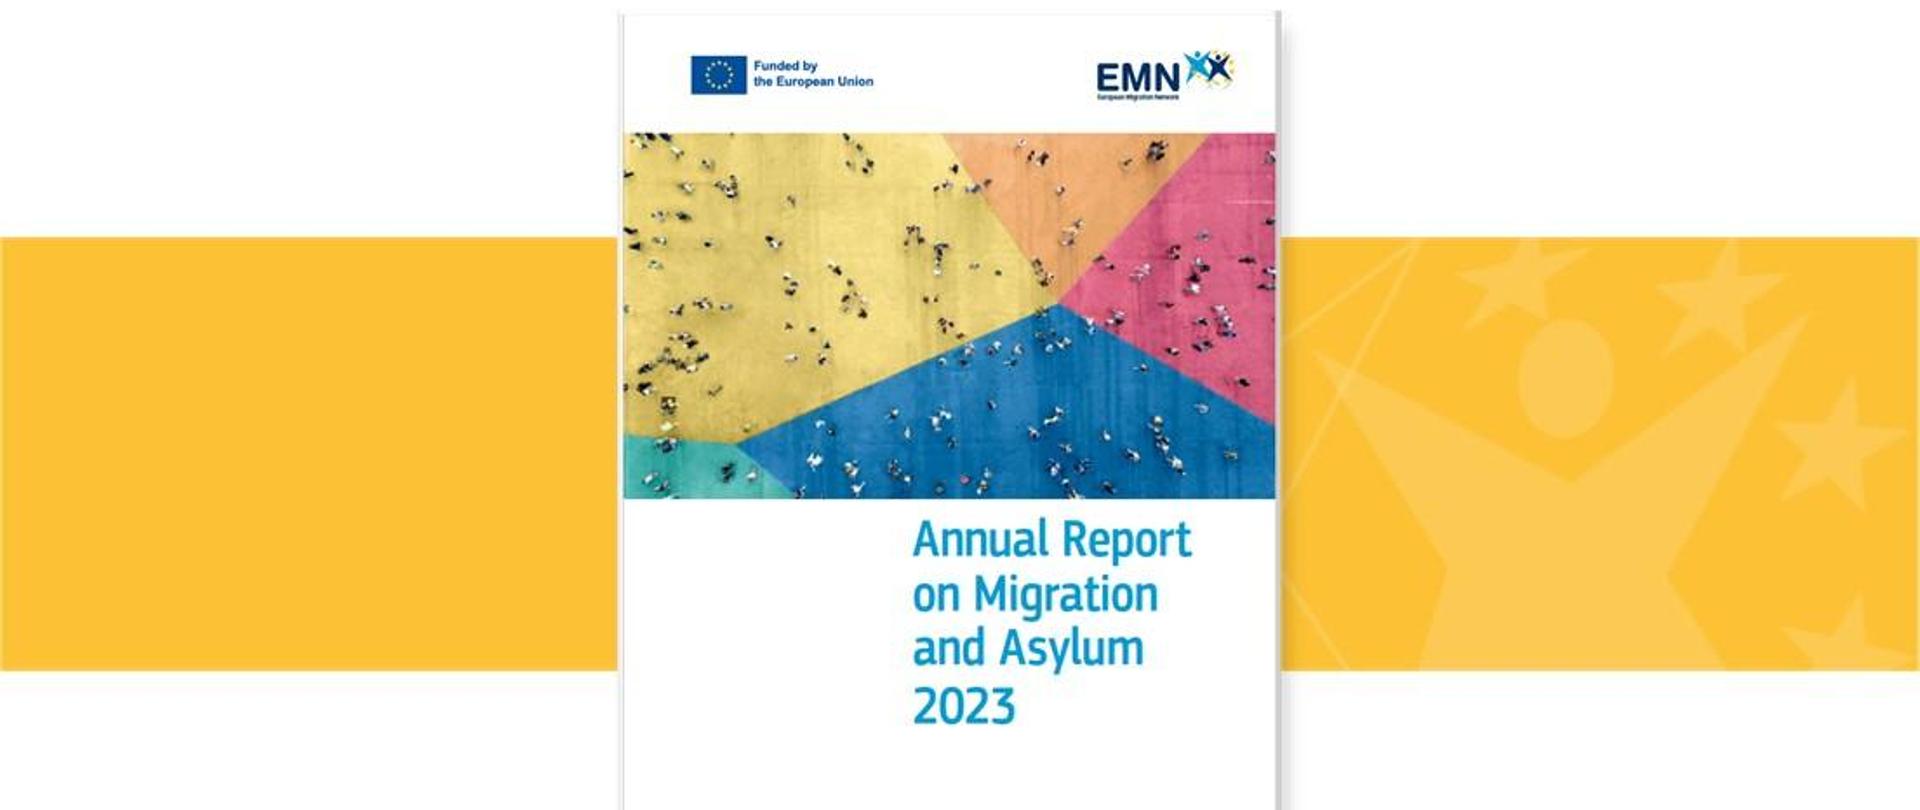 Annual Report on Migration and Asylum 2023